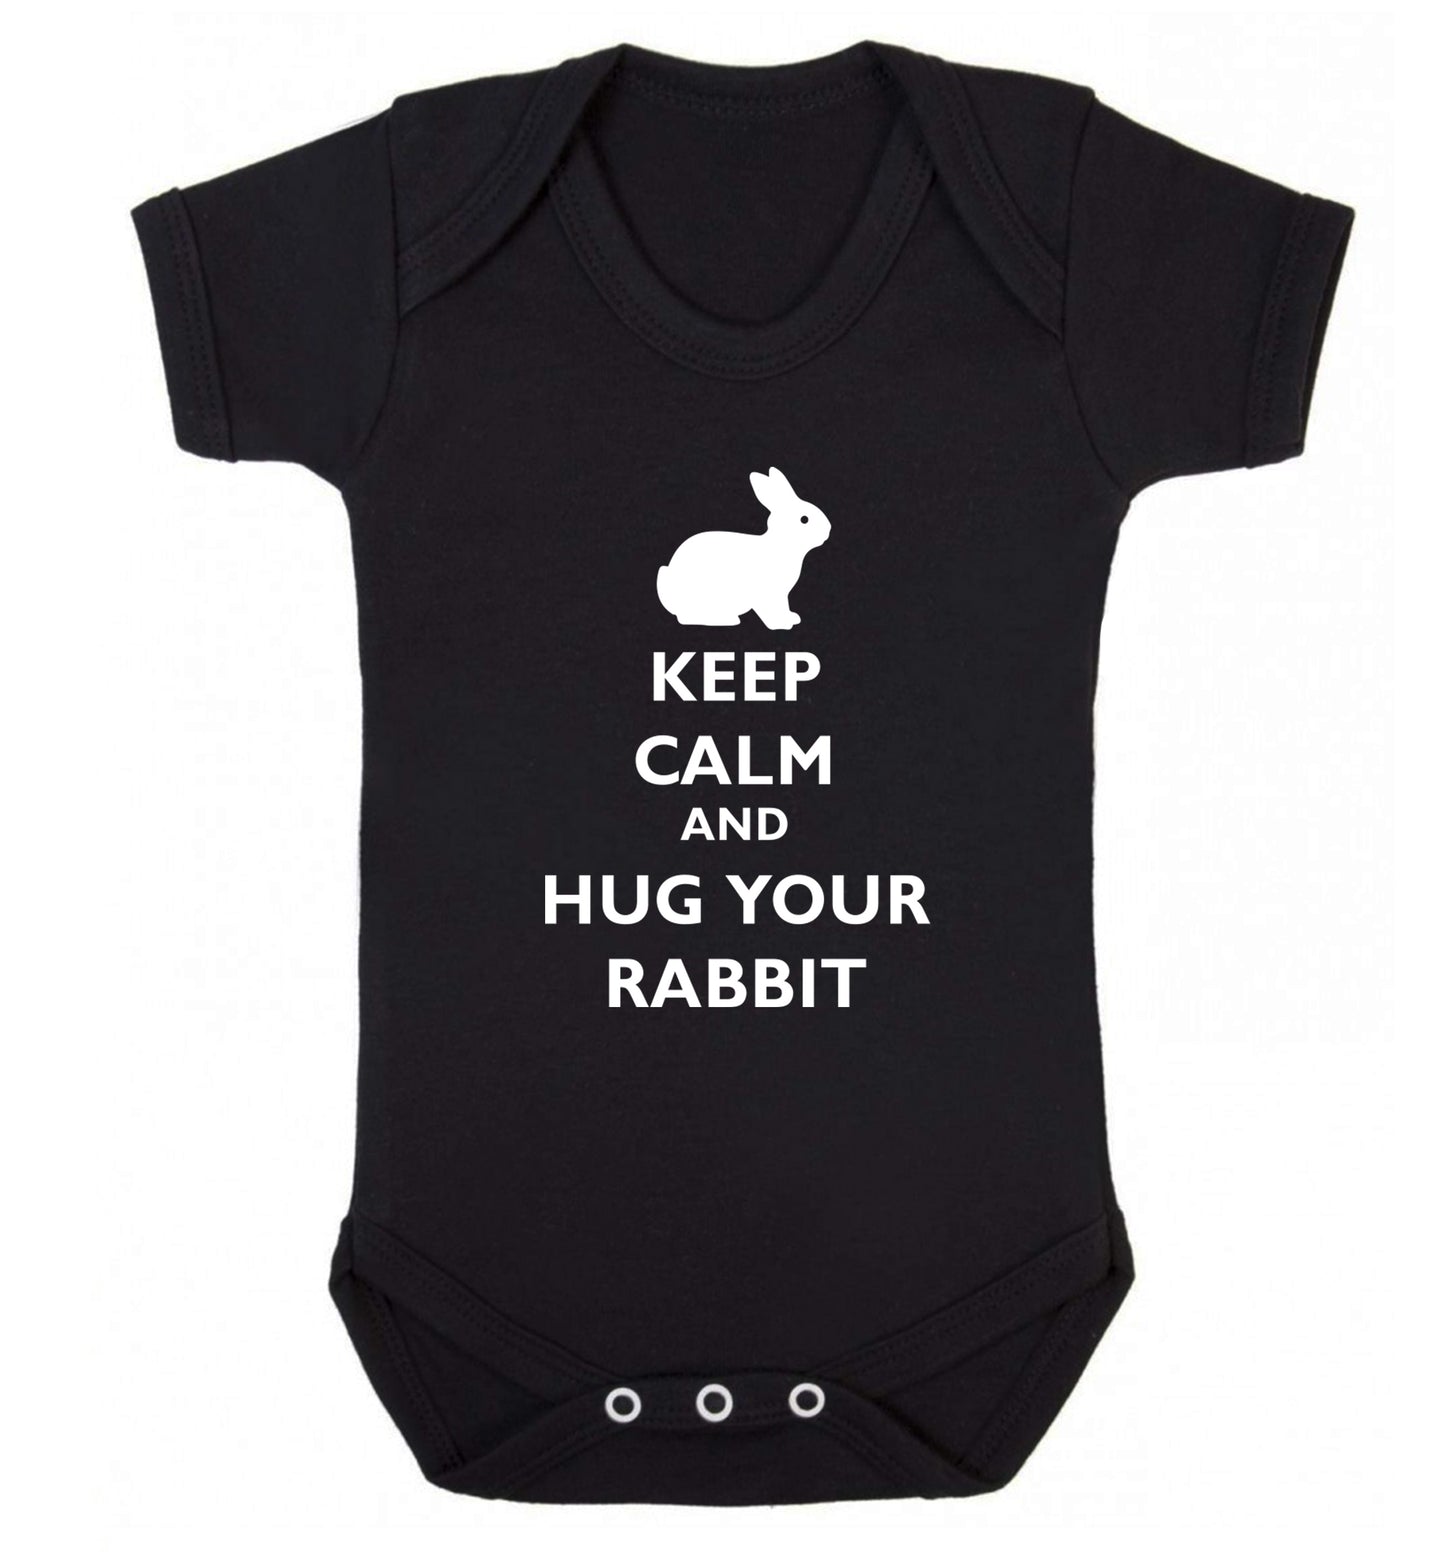 Keep calm and hug your rabbit Baby Vest black 18-24 months